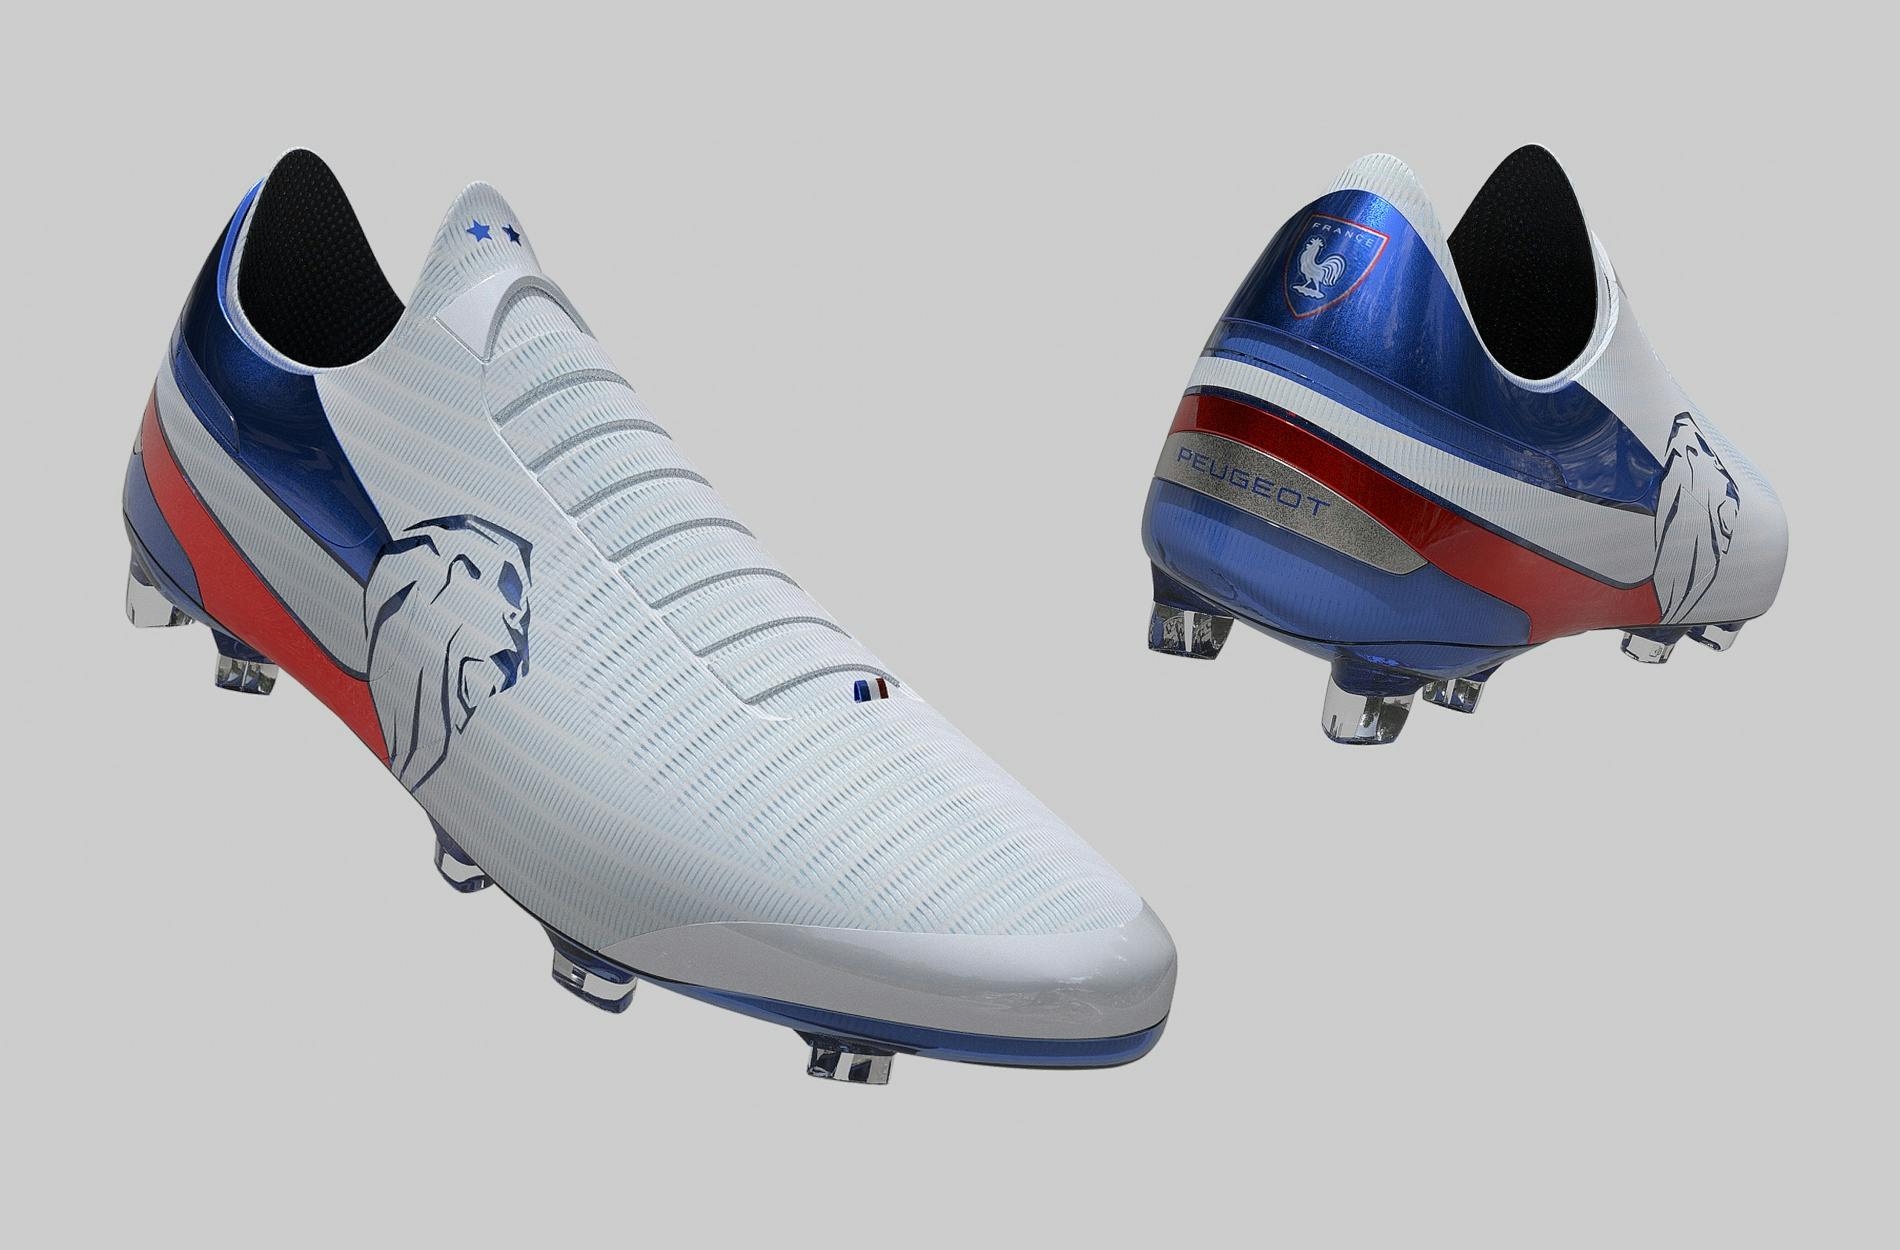 Concept Football Boots made by Car Manufacturers: Euro 2020 Edition - Lease Fetcher